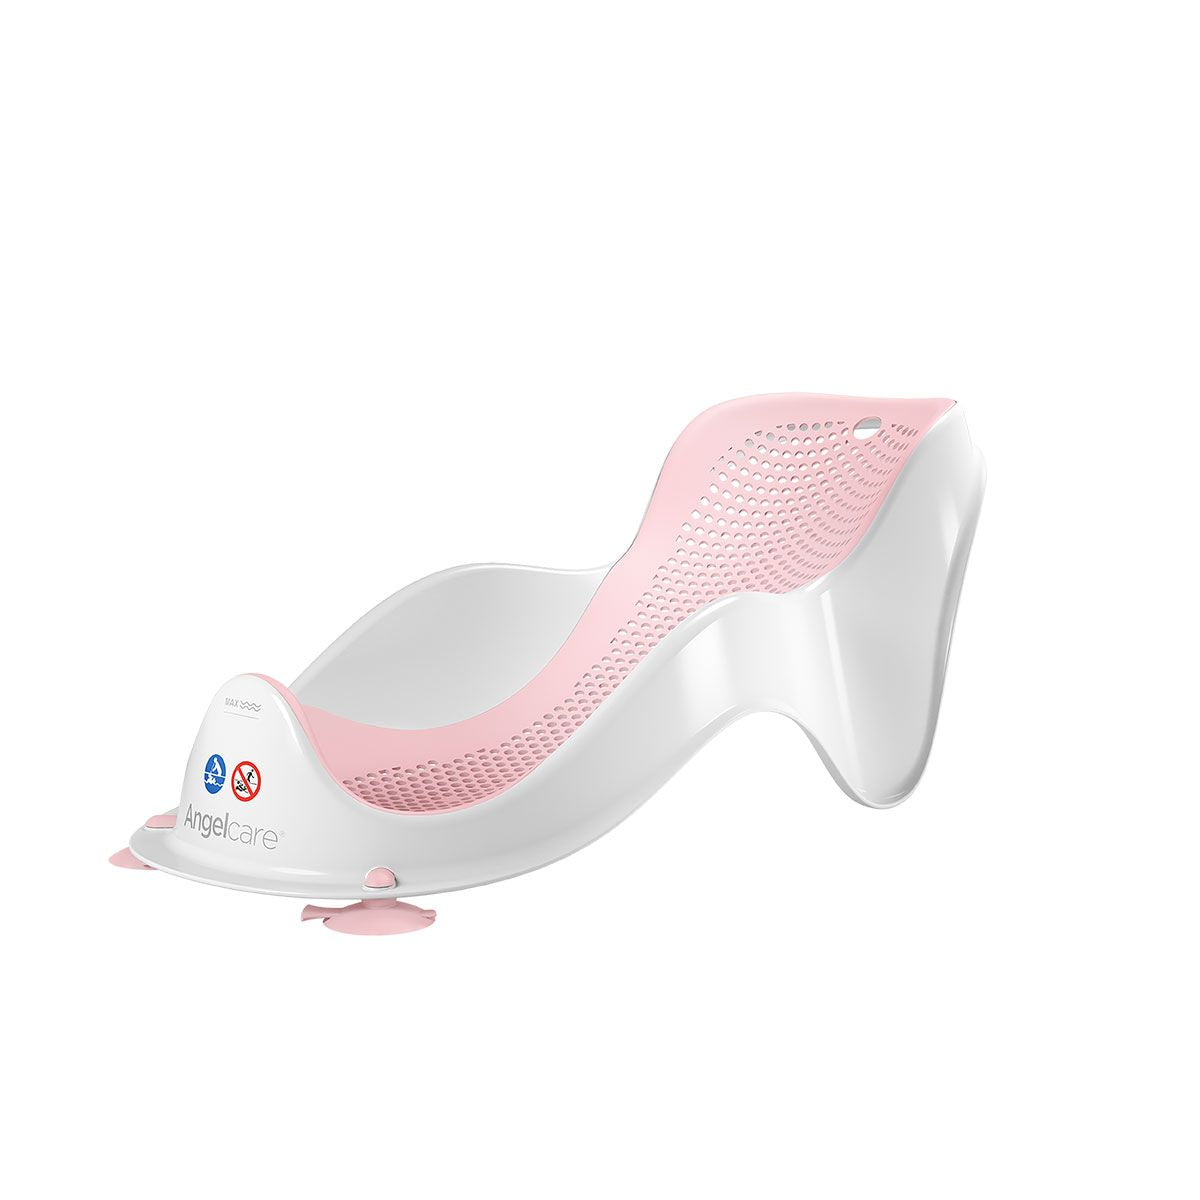 Angelcare Fit Bath Support - Blue/Grey/Pink